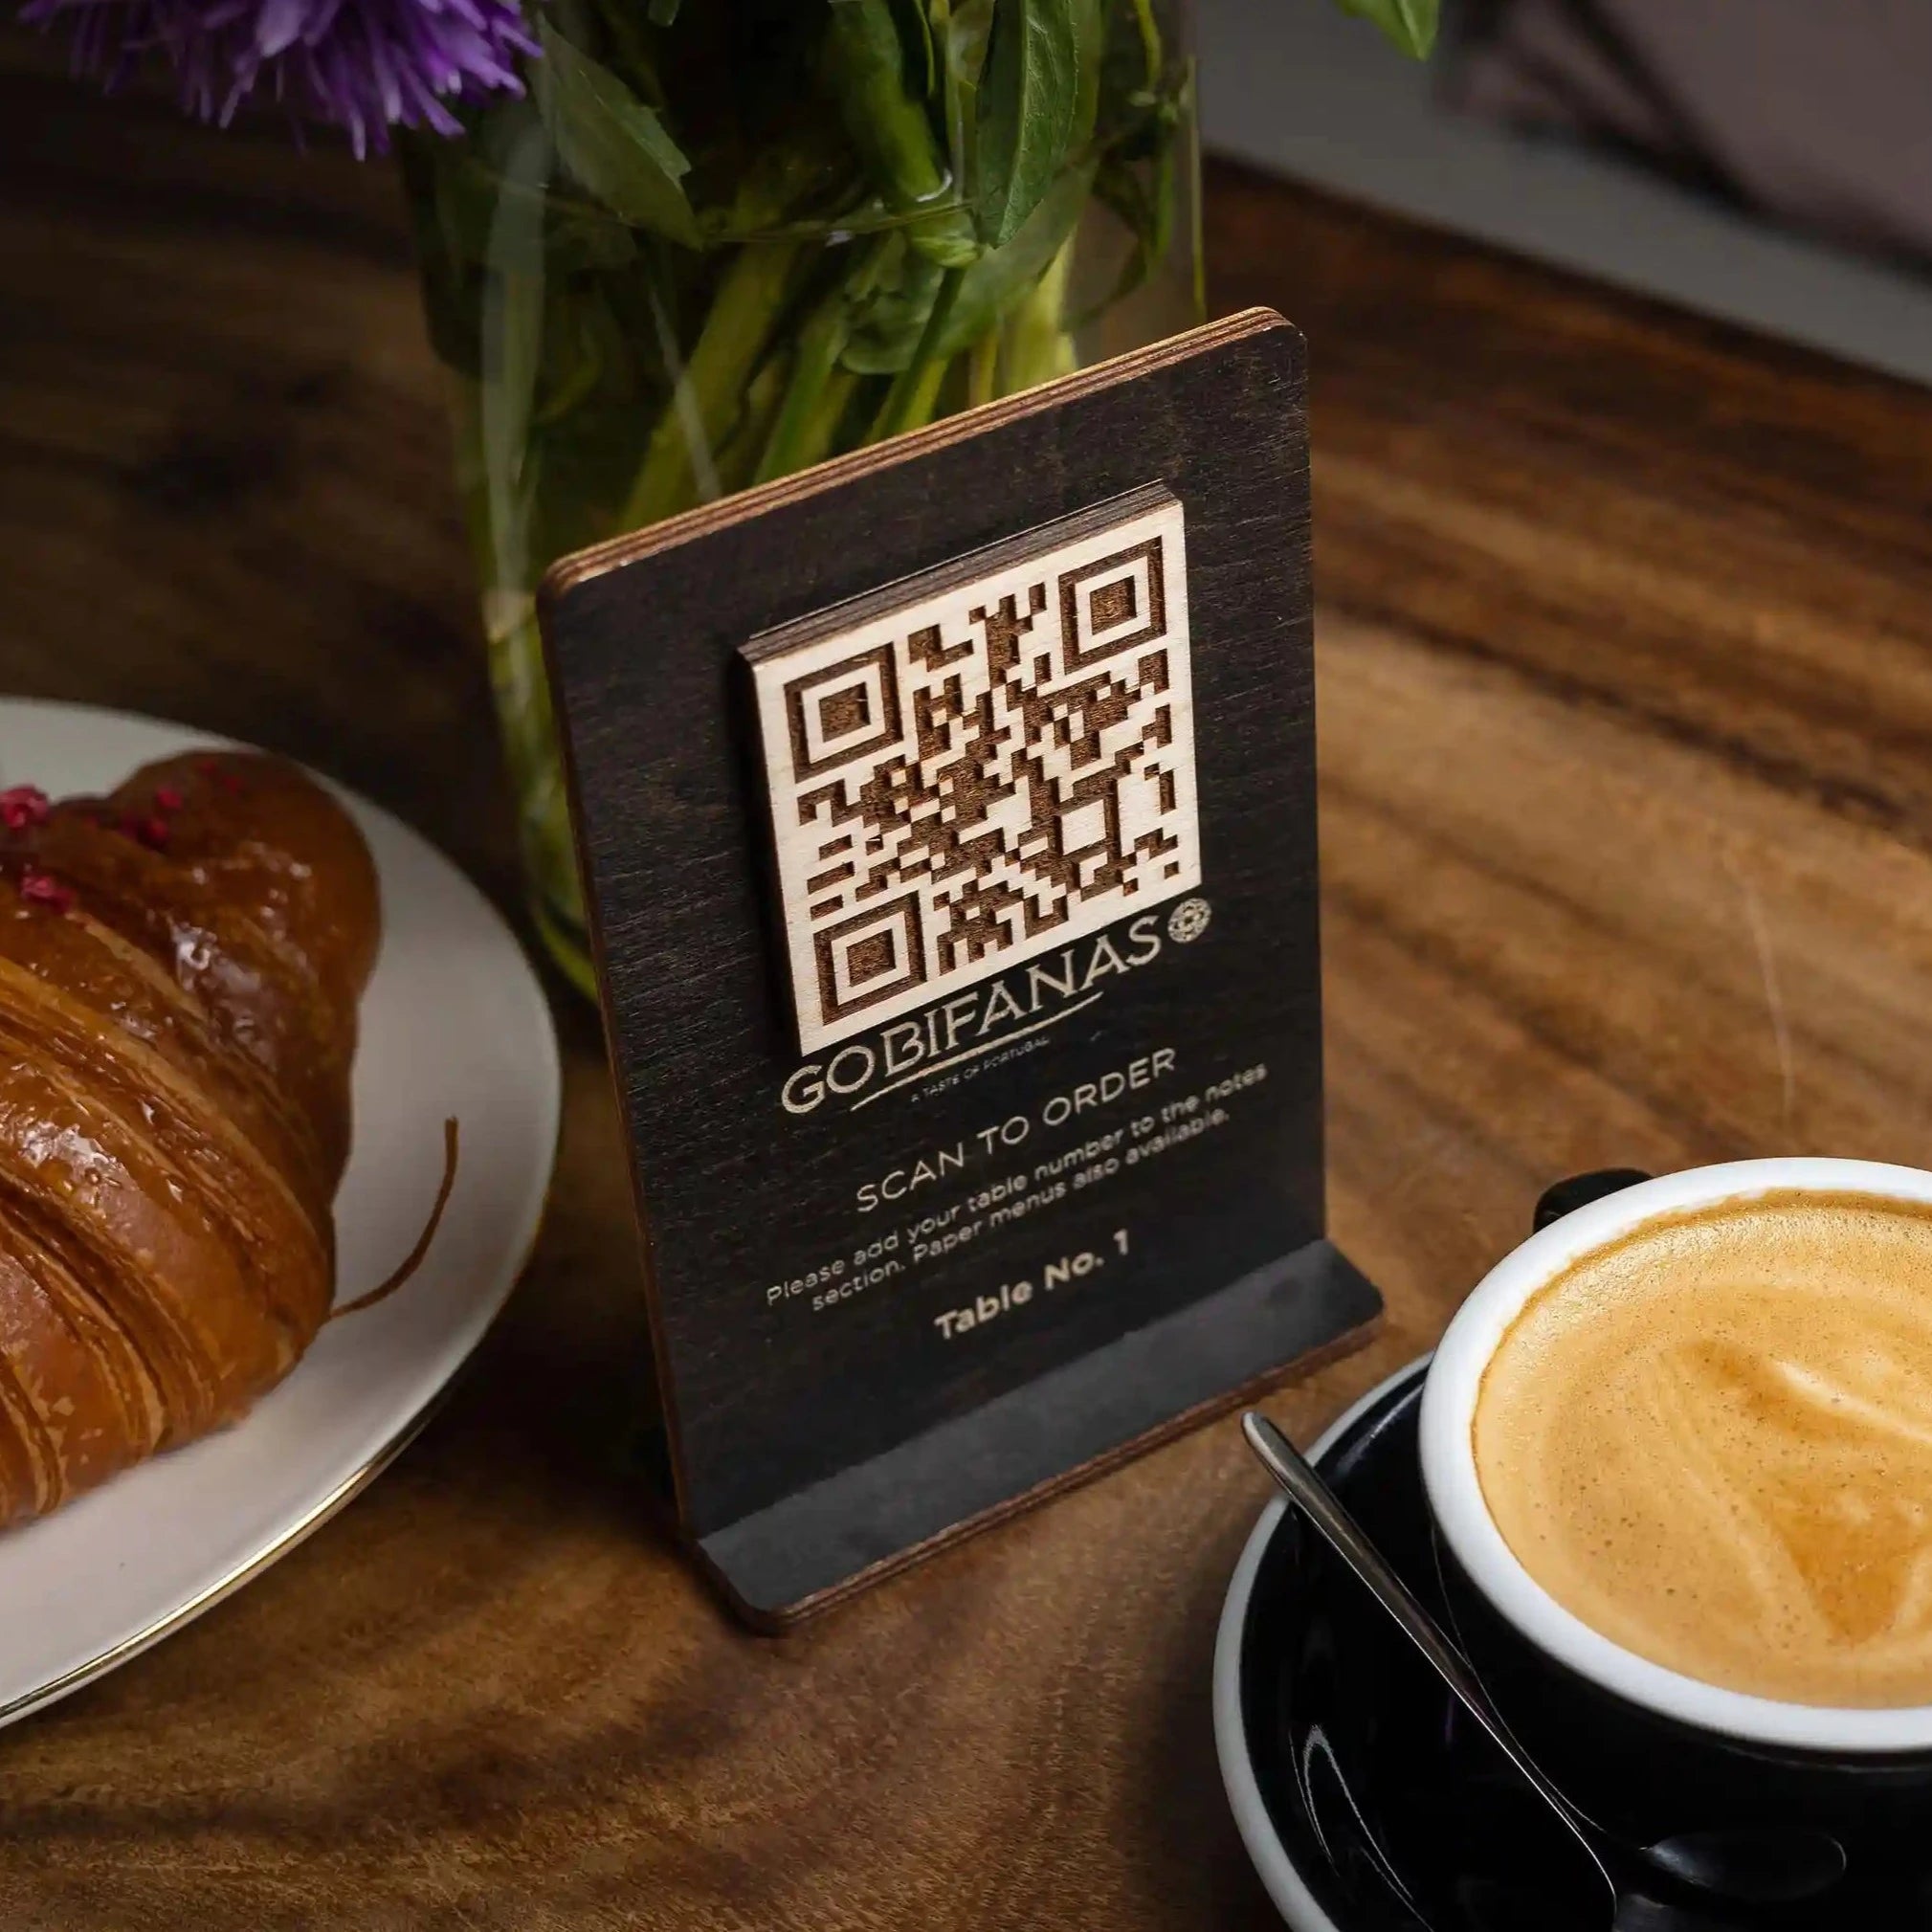 Wooden Table Stand with QR Code Menu Sign